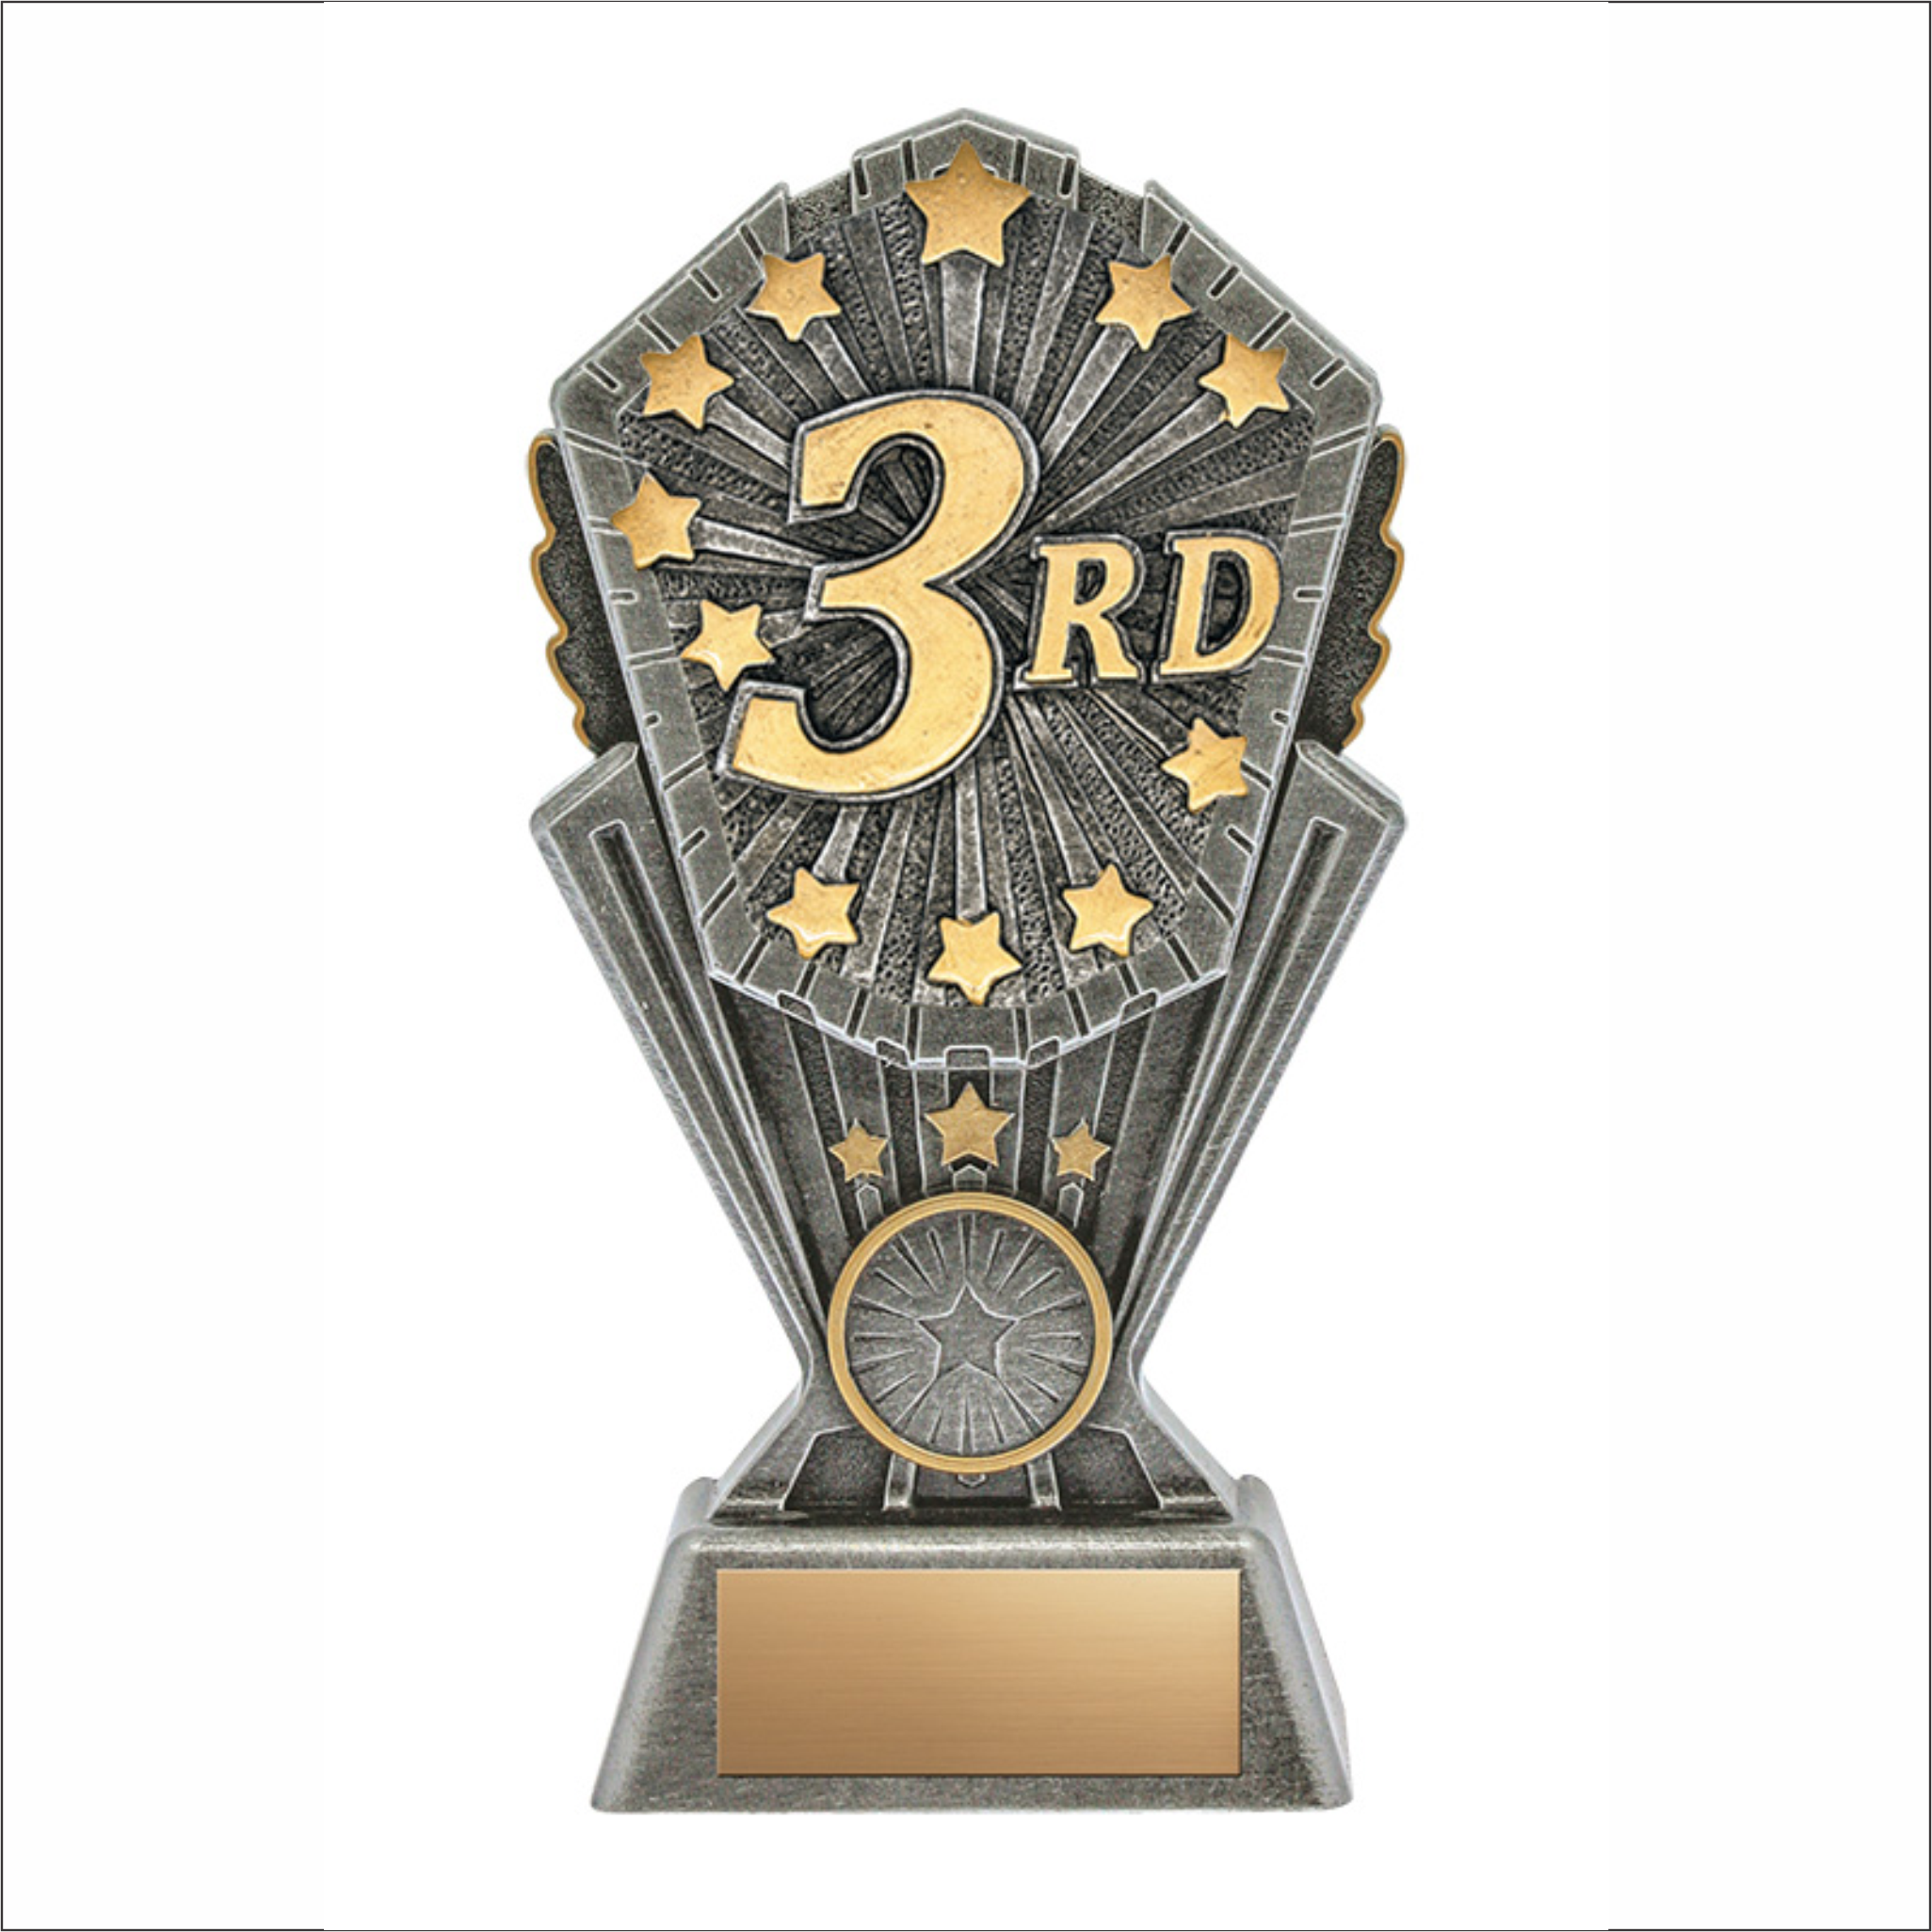 Third Place trophy - Cosmos series